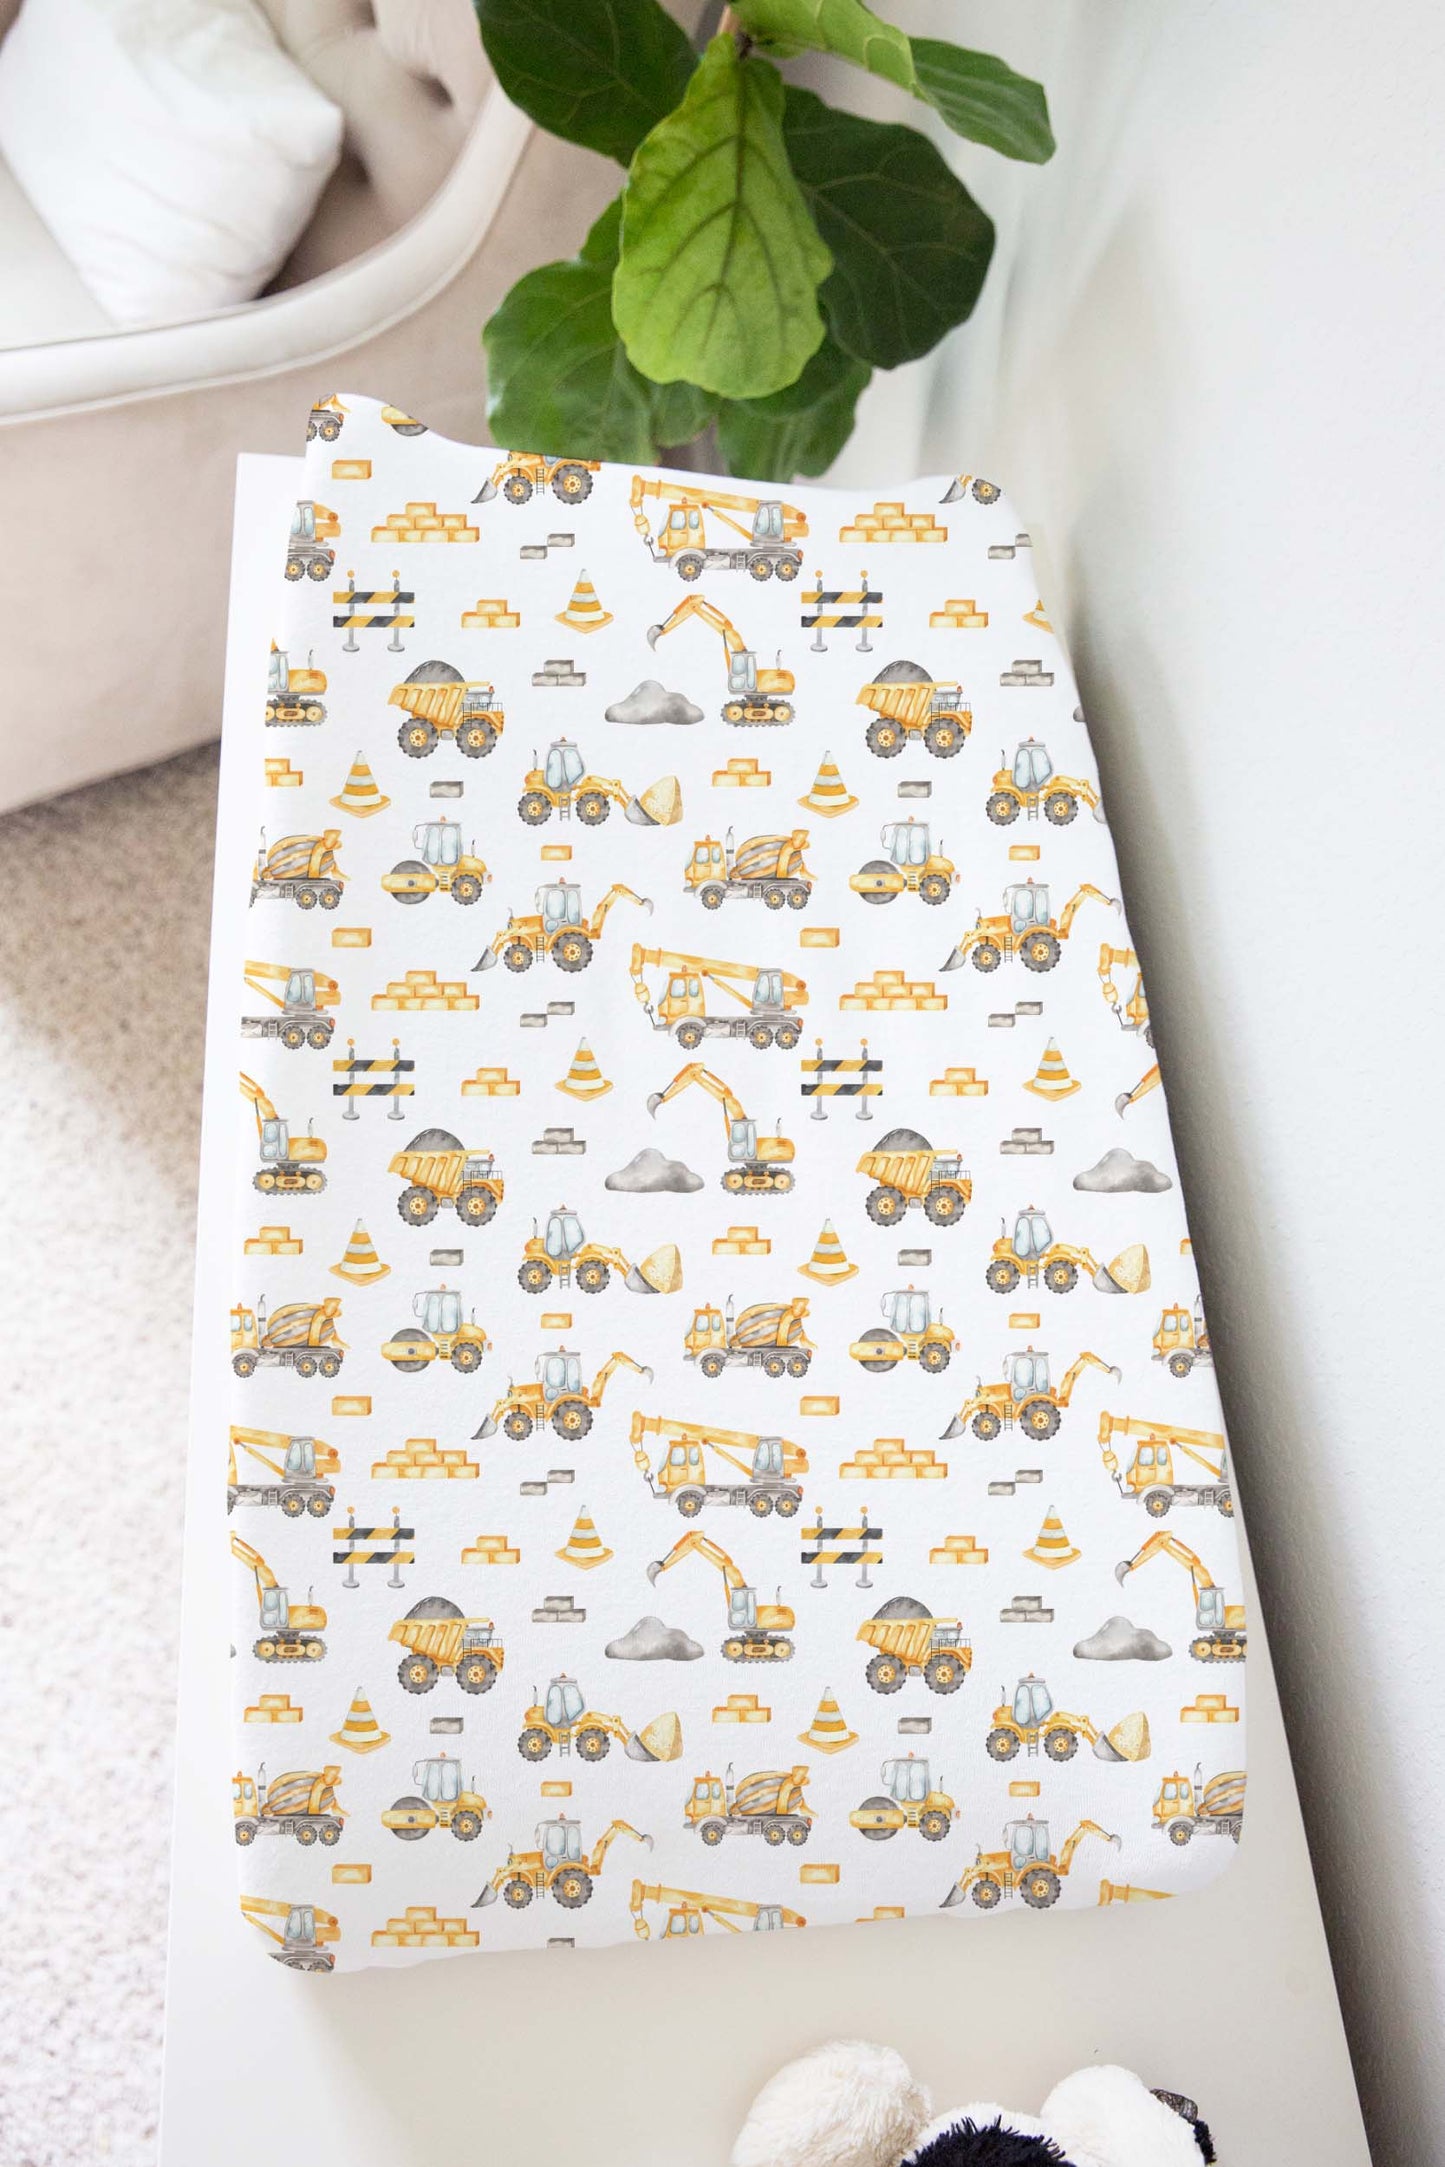 Construction Changing Pad Cover, Construction nursery decor - Under Construction